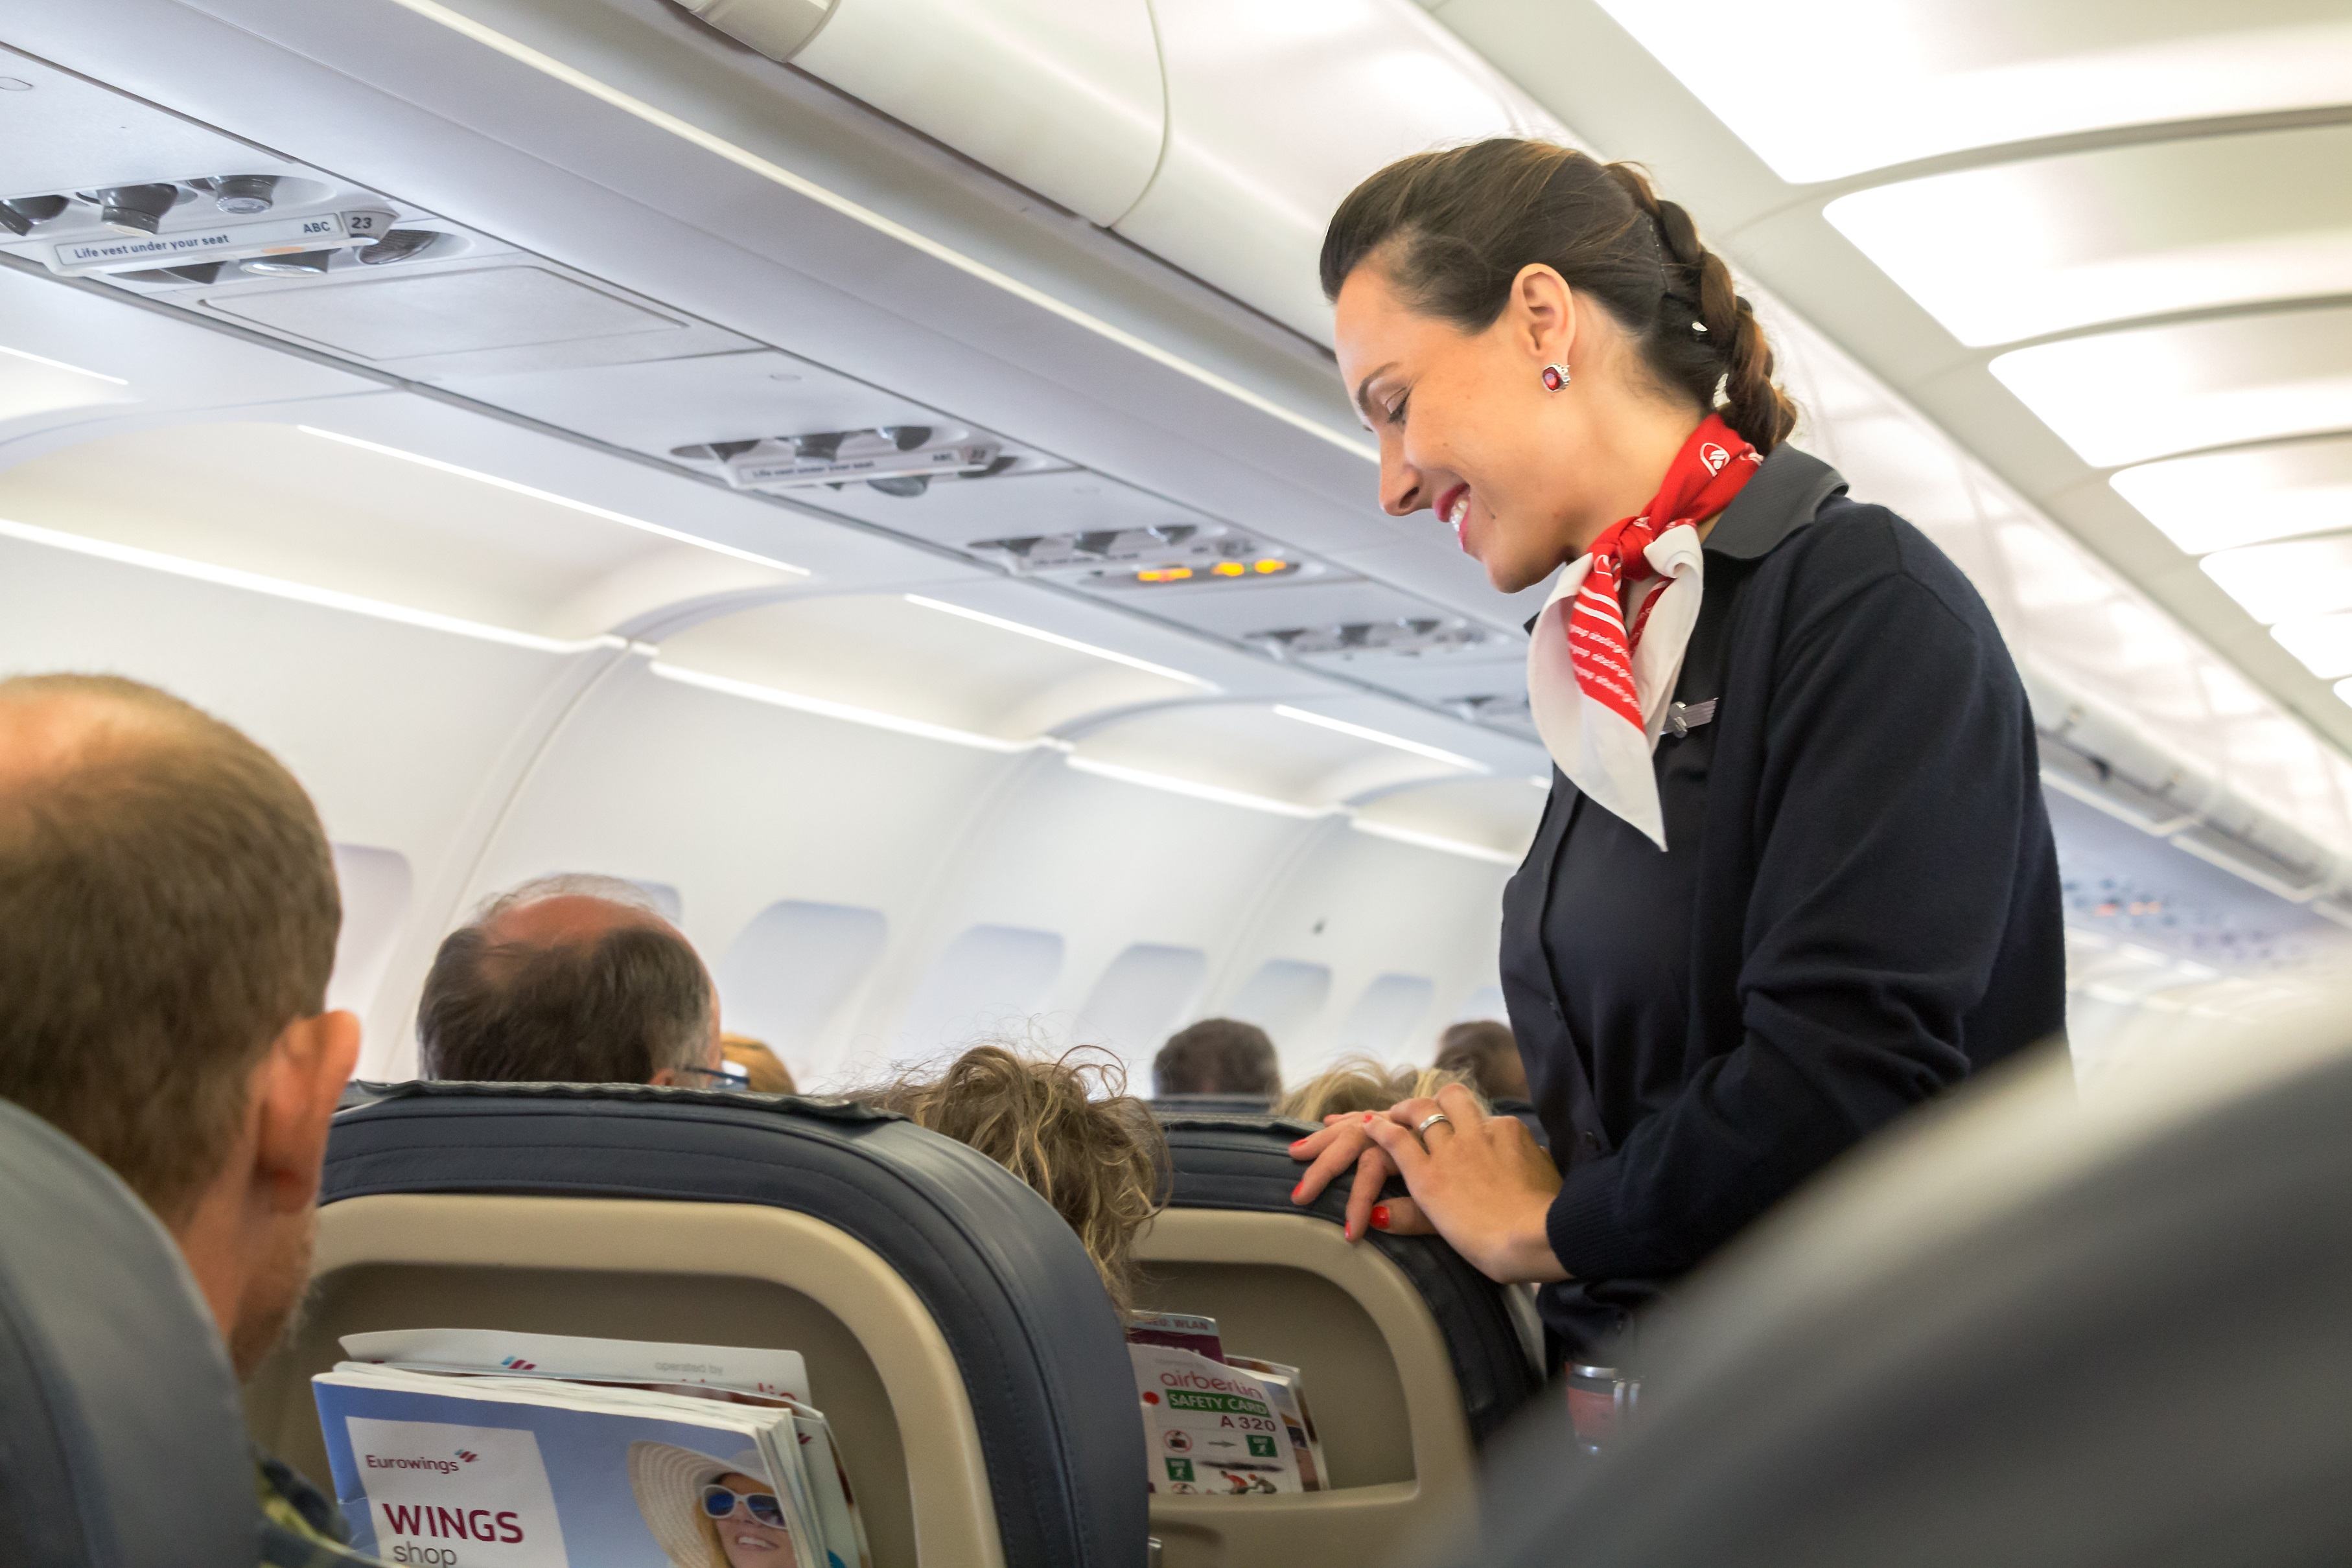 Flight Attendants Reveal the Things They’re Silently Judging You For